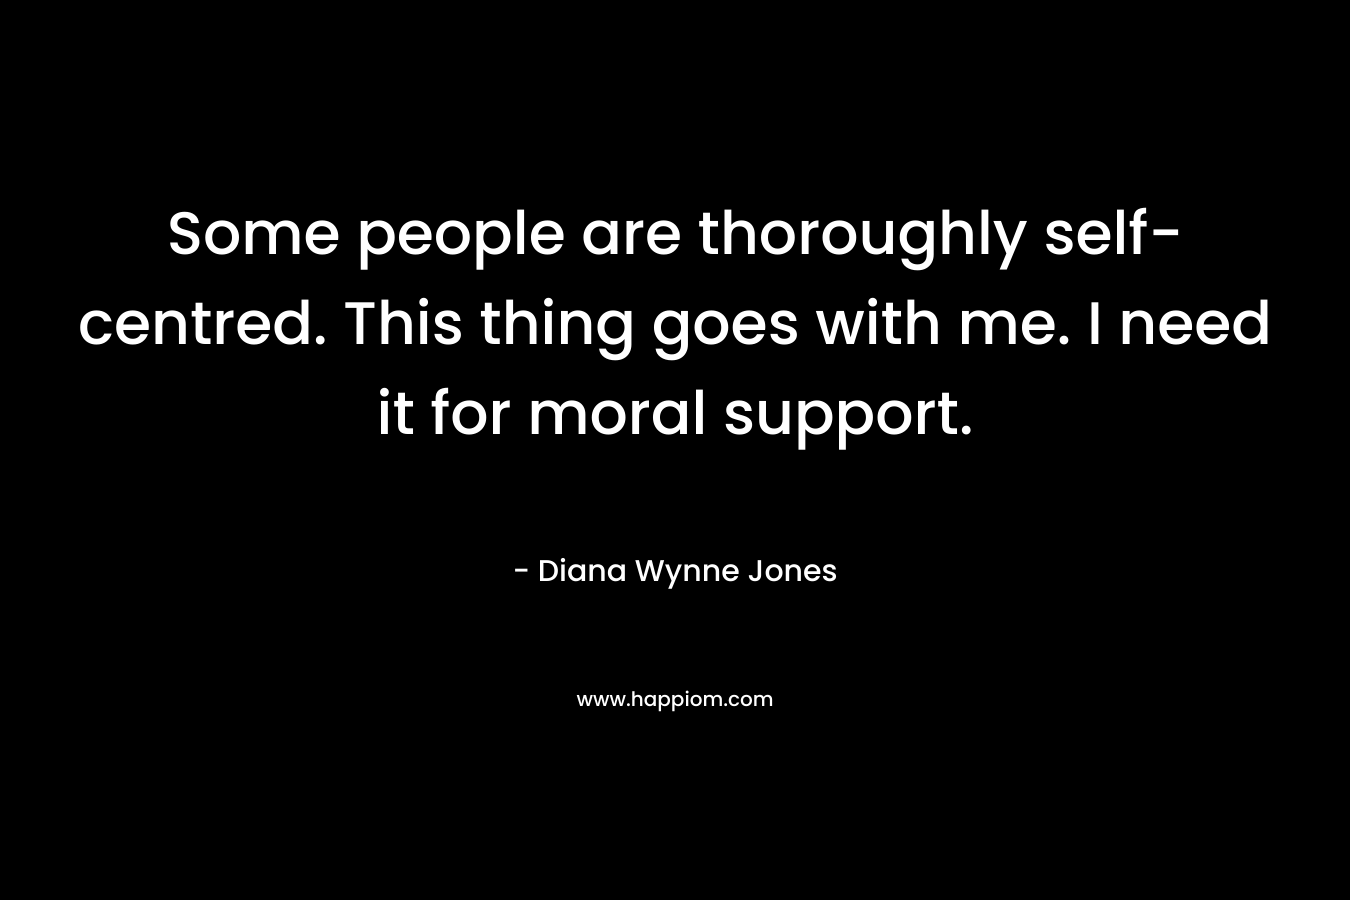 Some people are thoroughly self-centred. This thing goes with me. I need it for moral support. – Diana Wynne Jones